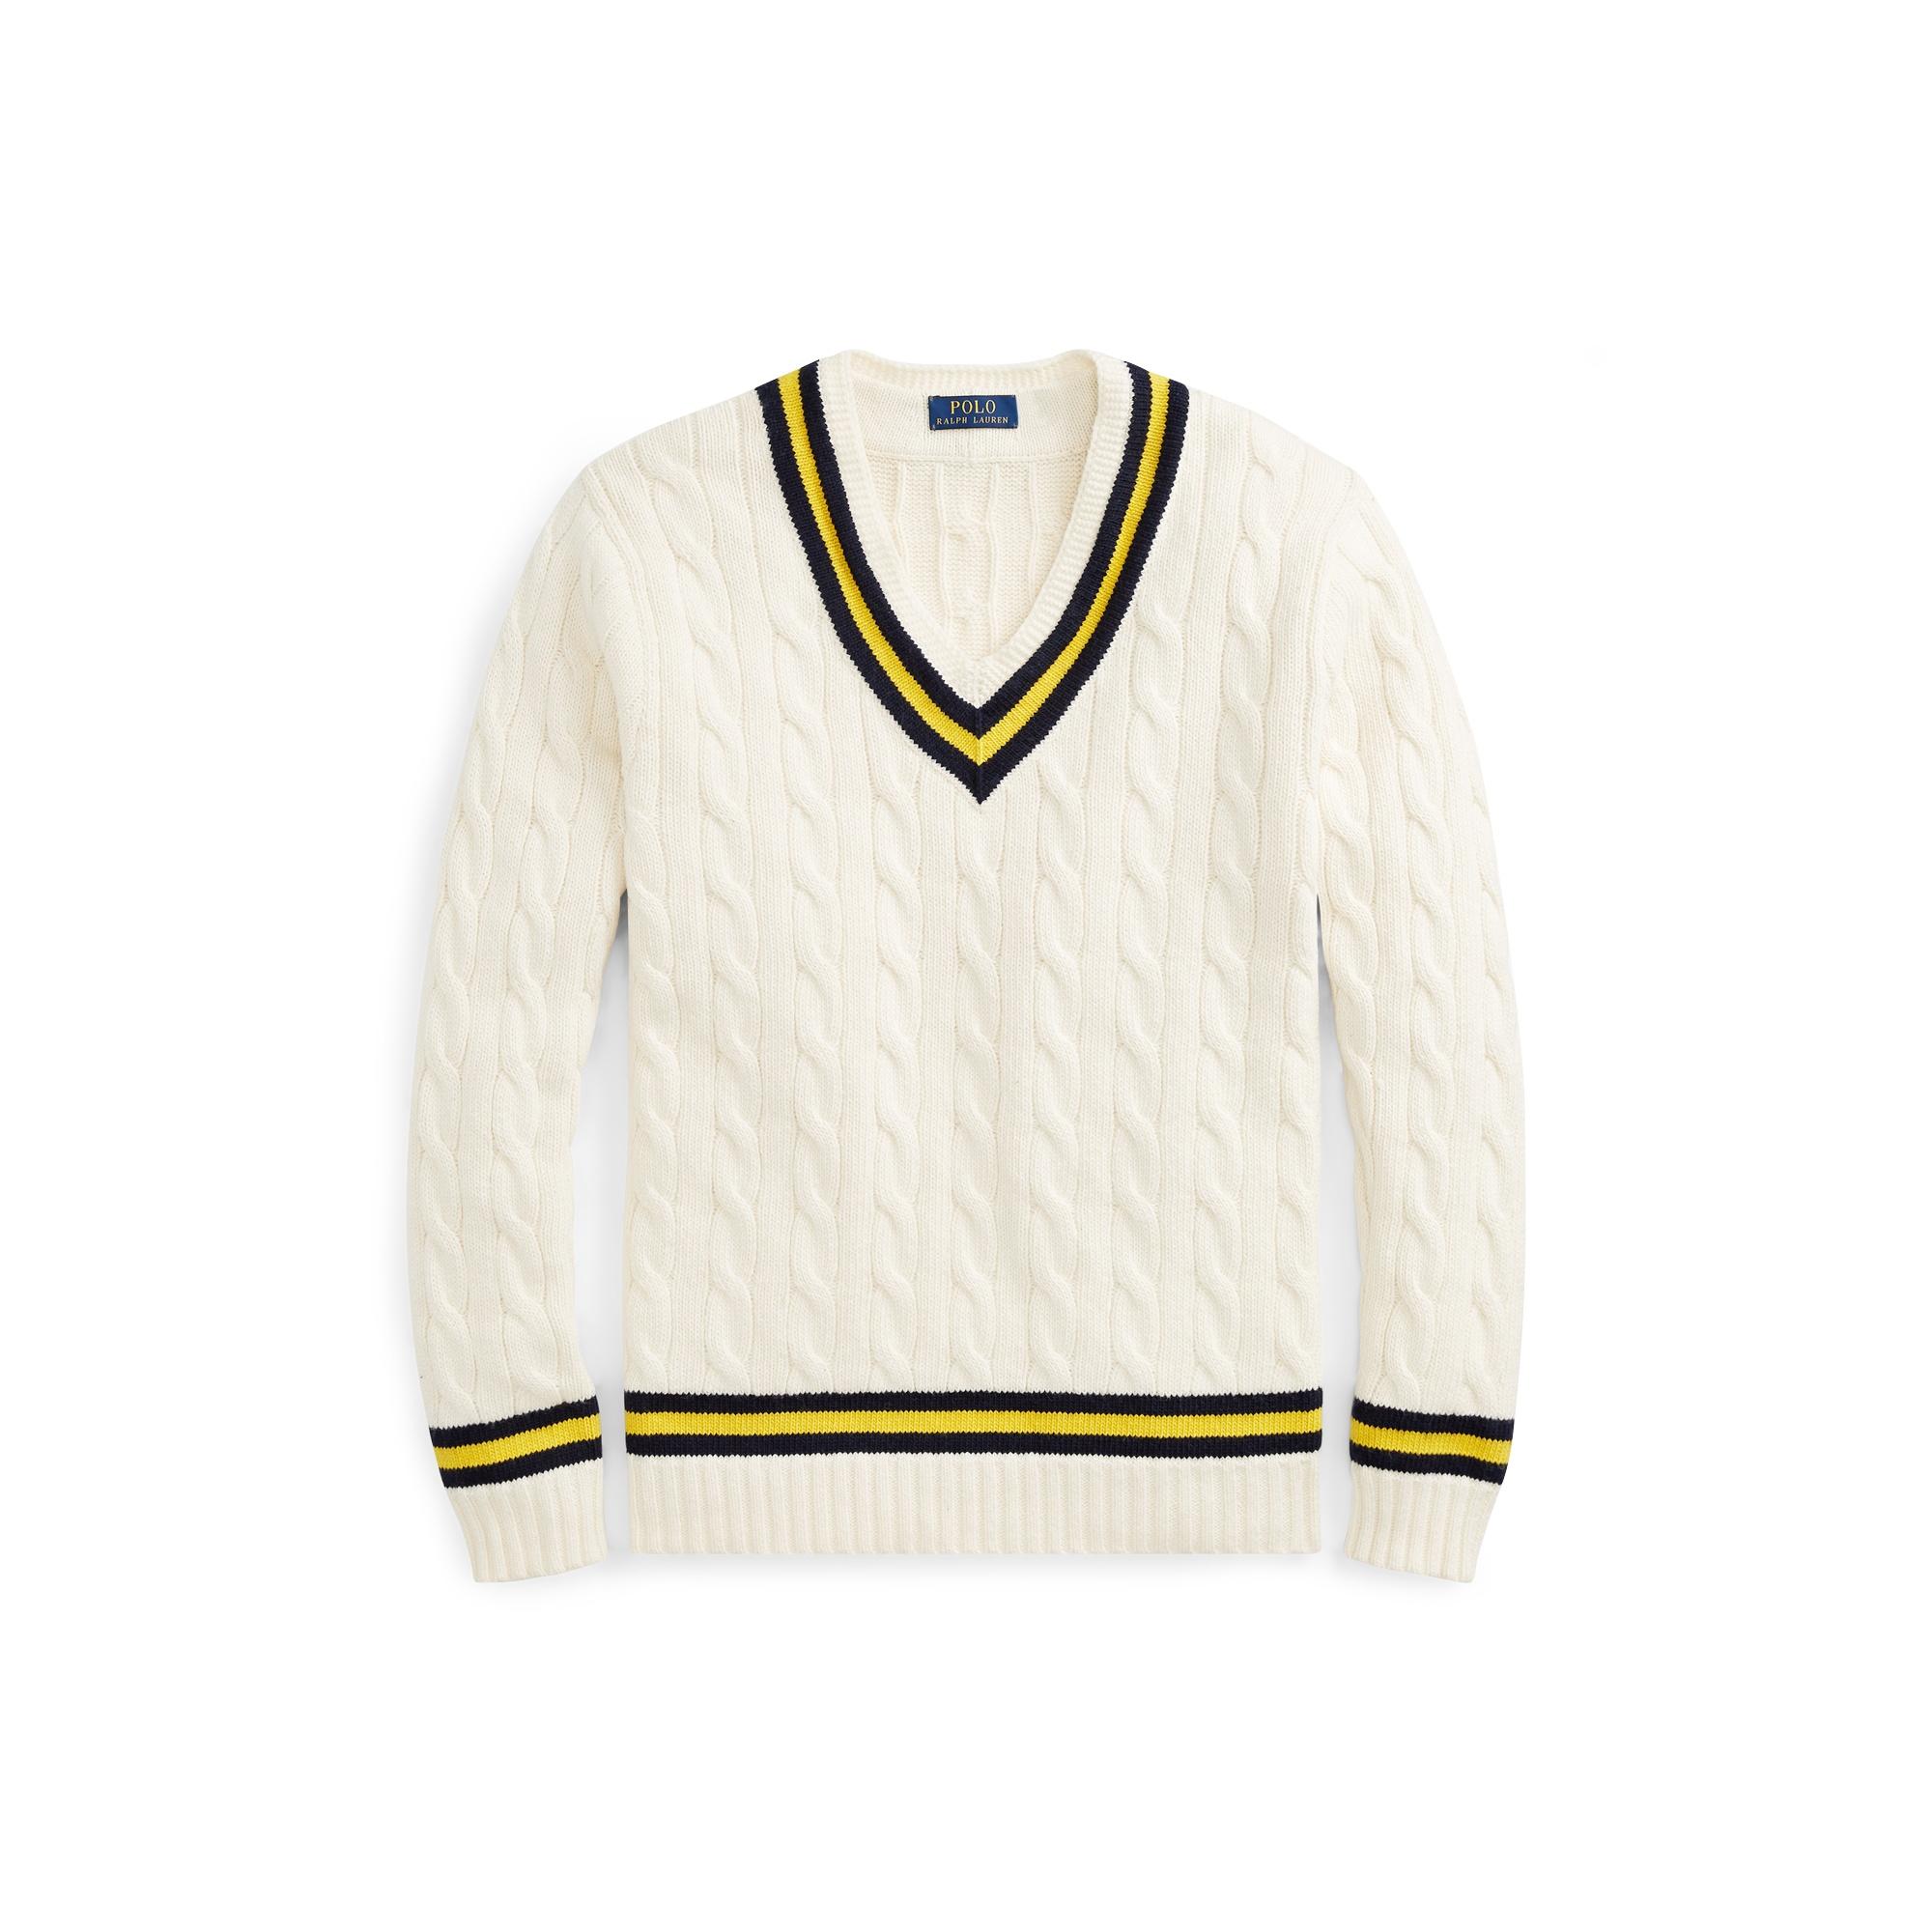 Ralph Lauren Cashmere The Iconic Cricket Sweater in Natural for Men - Lyst